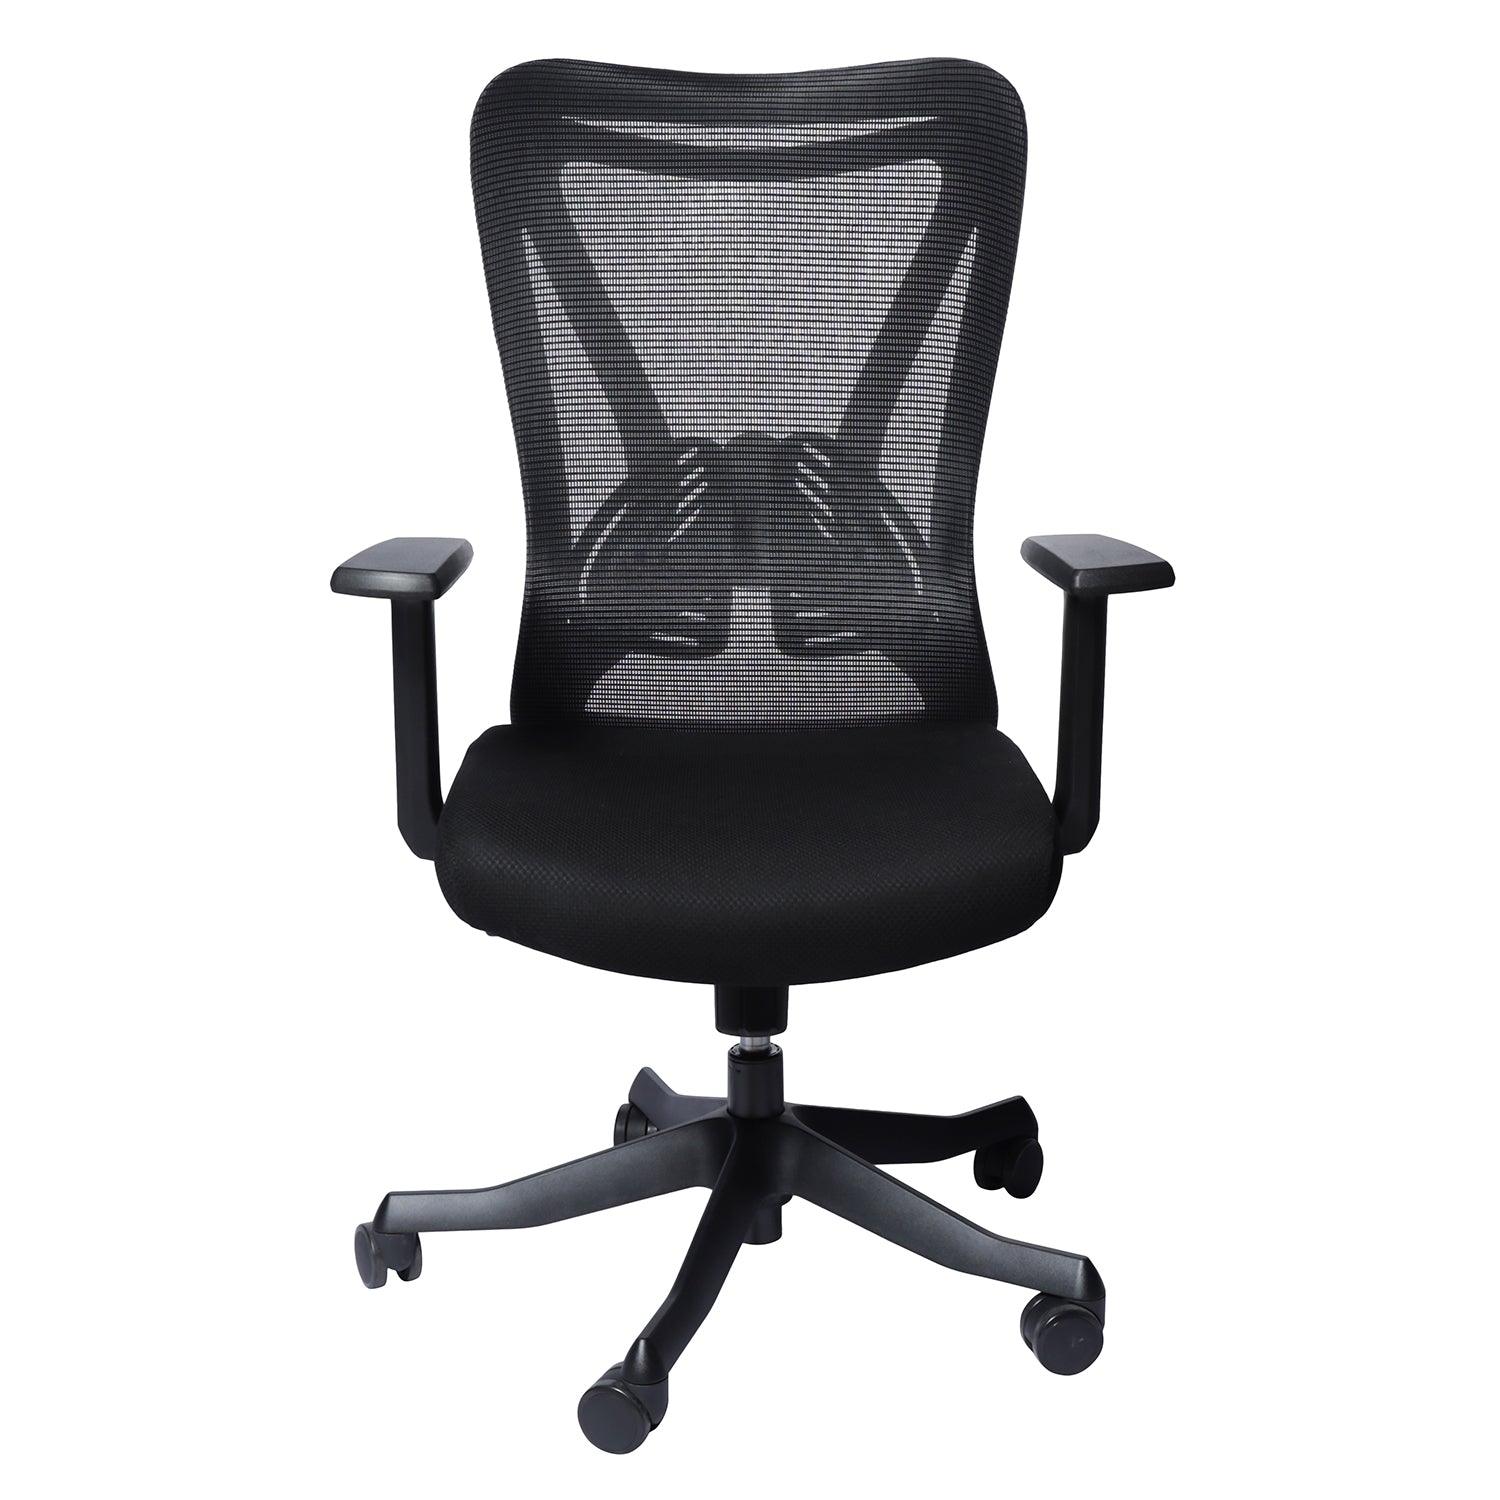 DrLuxur Helios™ Office/Gaming Chair- Perfect for Posture, Work and Gaming - DrLuxur